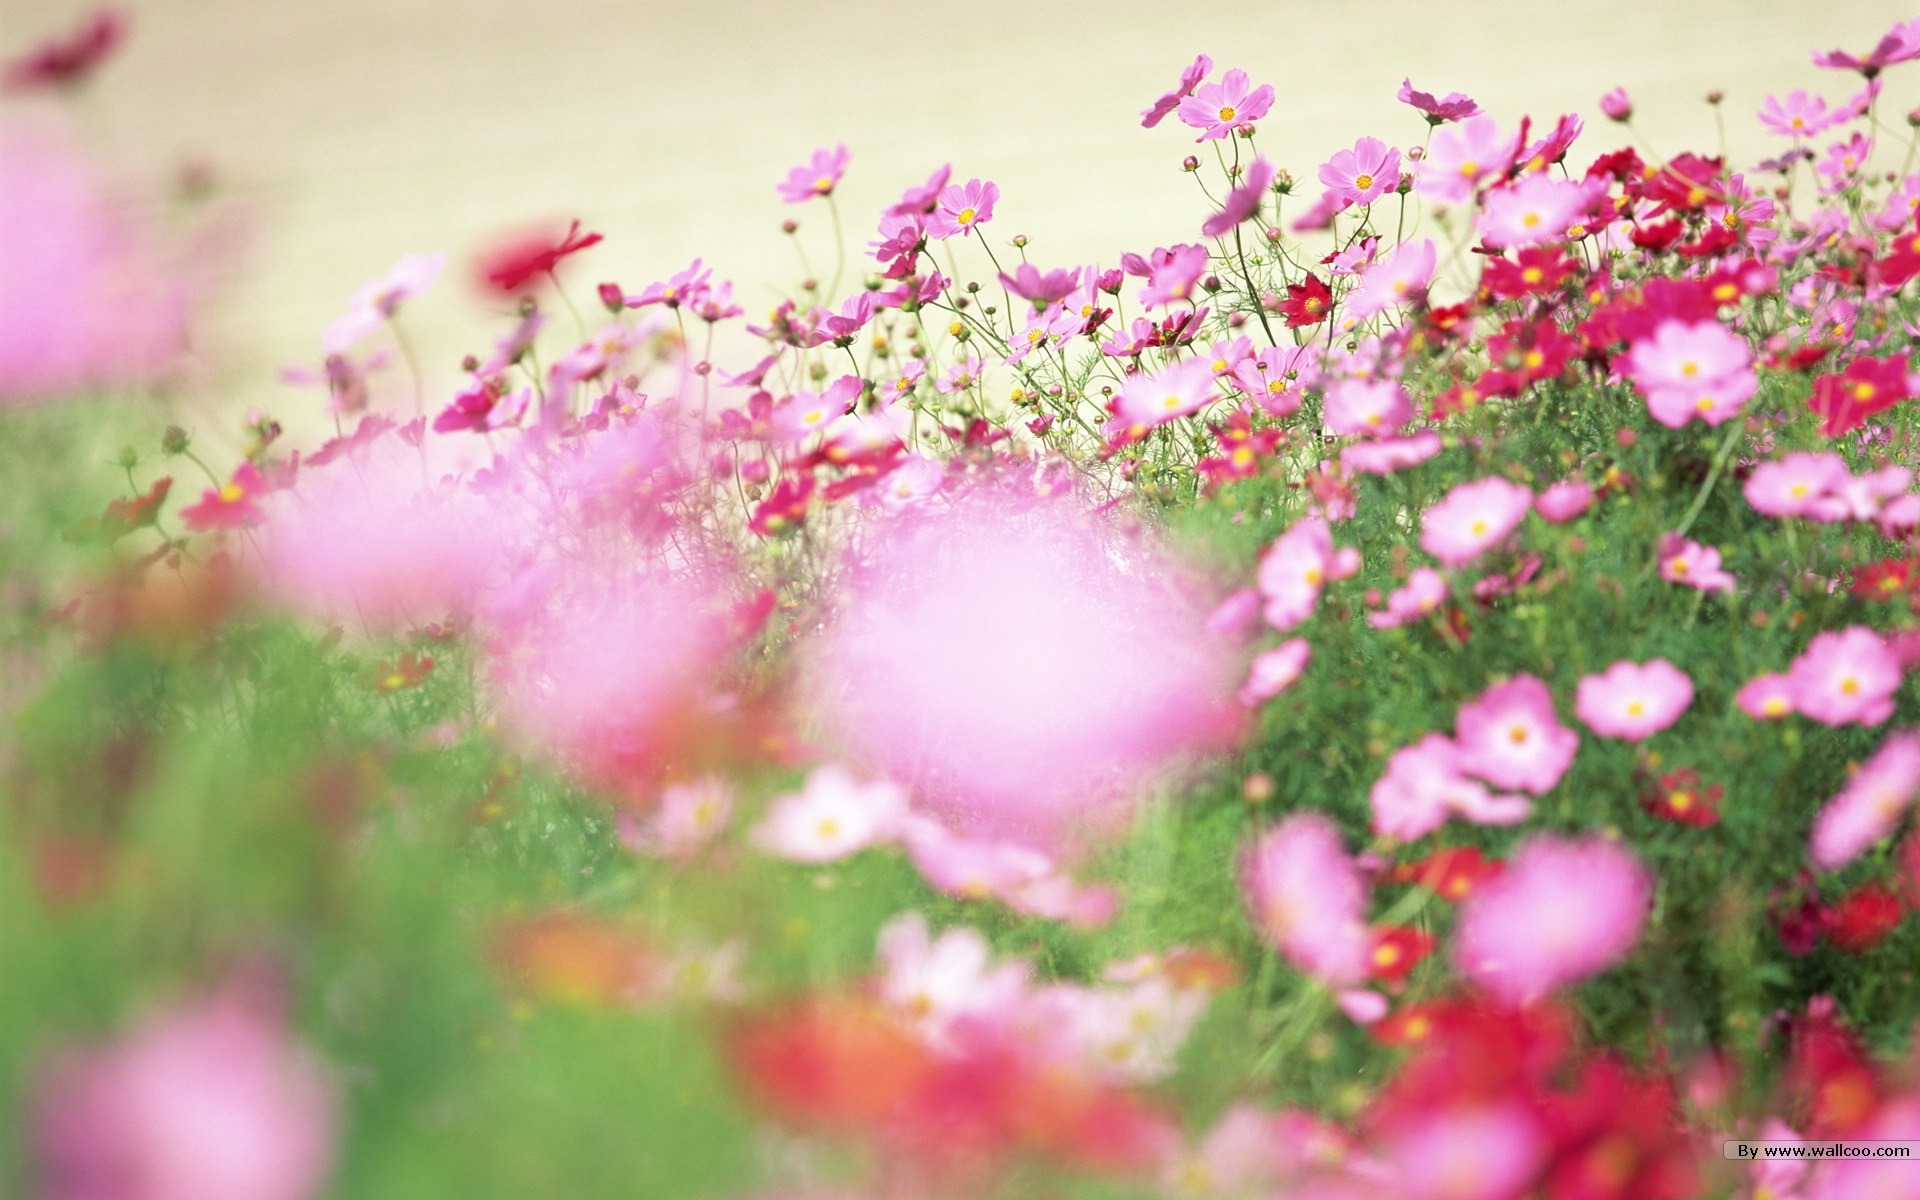 Fresh style Flowers Wallpapers #4 - 1920x1200